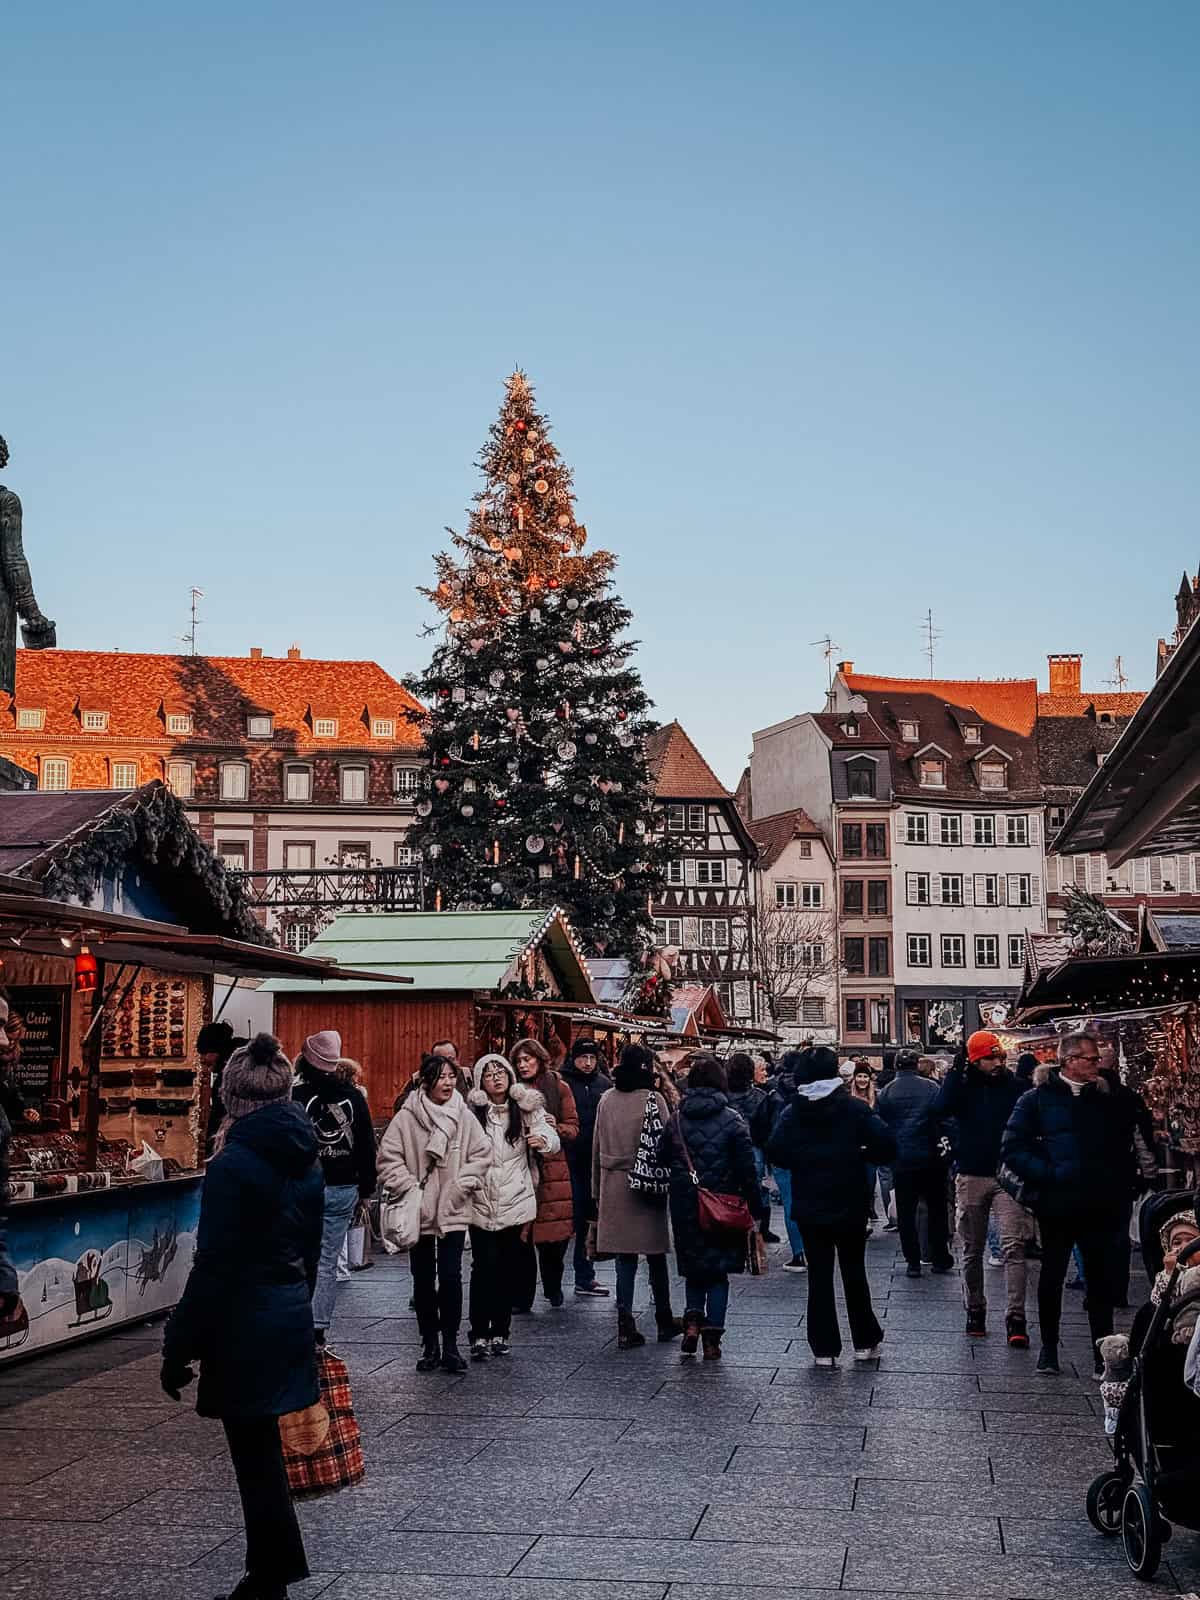 A bustling Christmas market in Strasbourg with a large christmas tree in the center